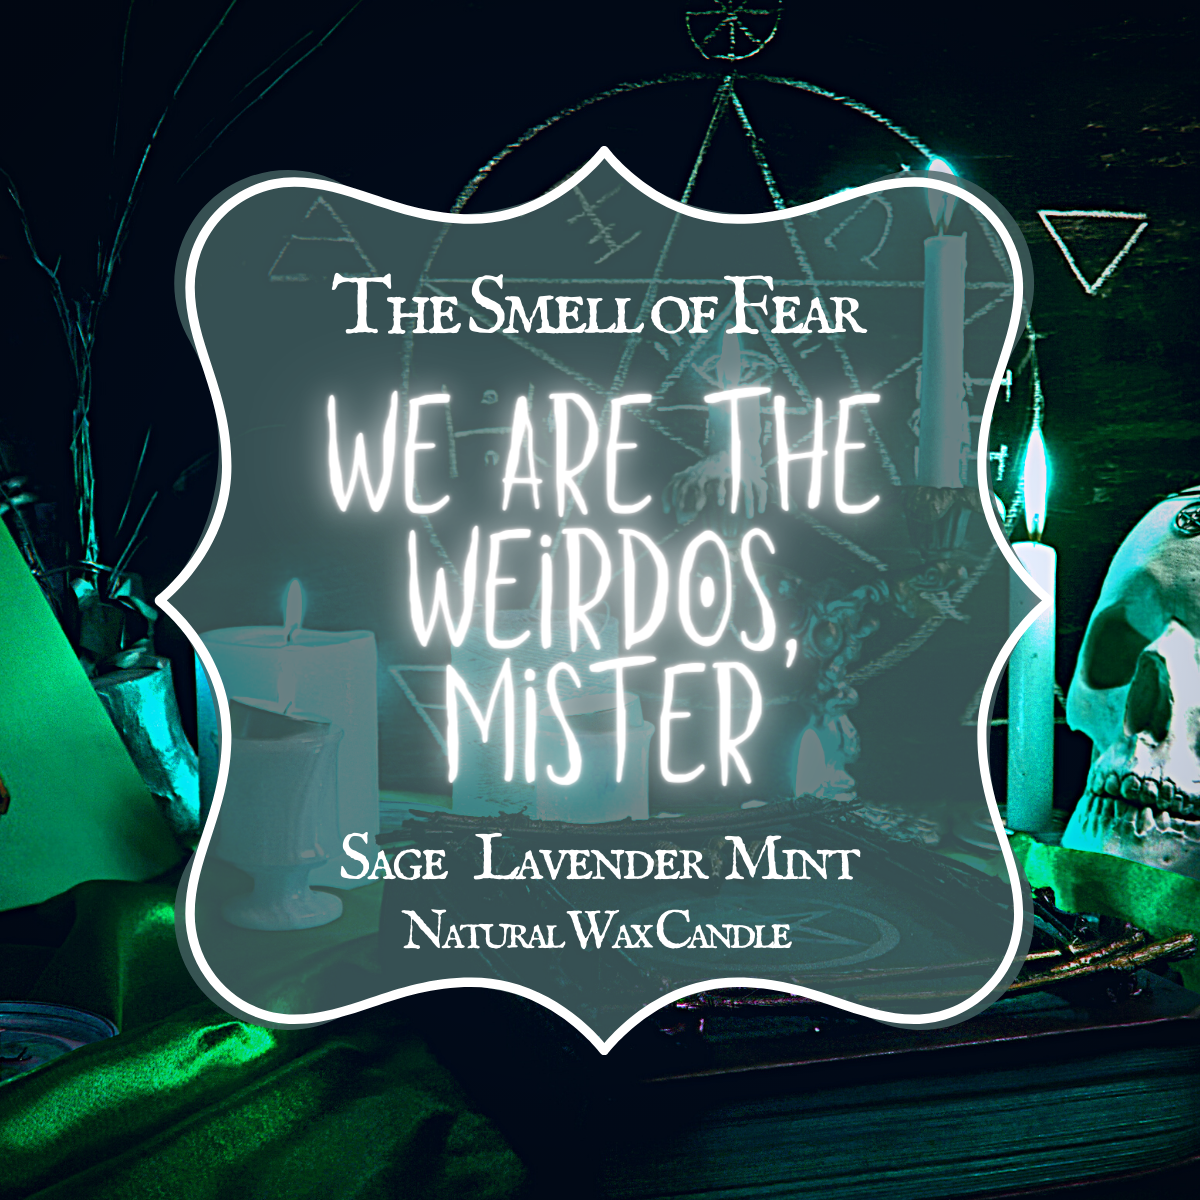 We're the Weirdos, Mister Candle - The Smell of Fear 